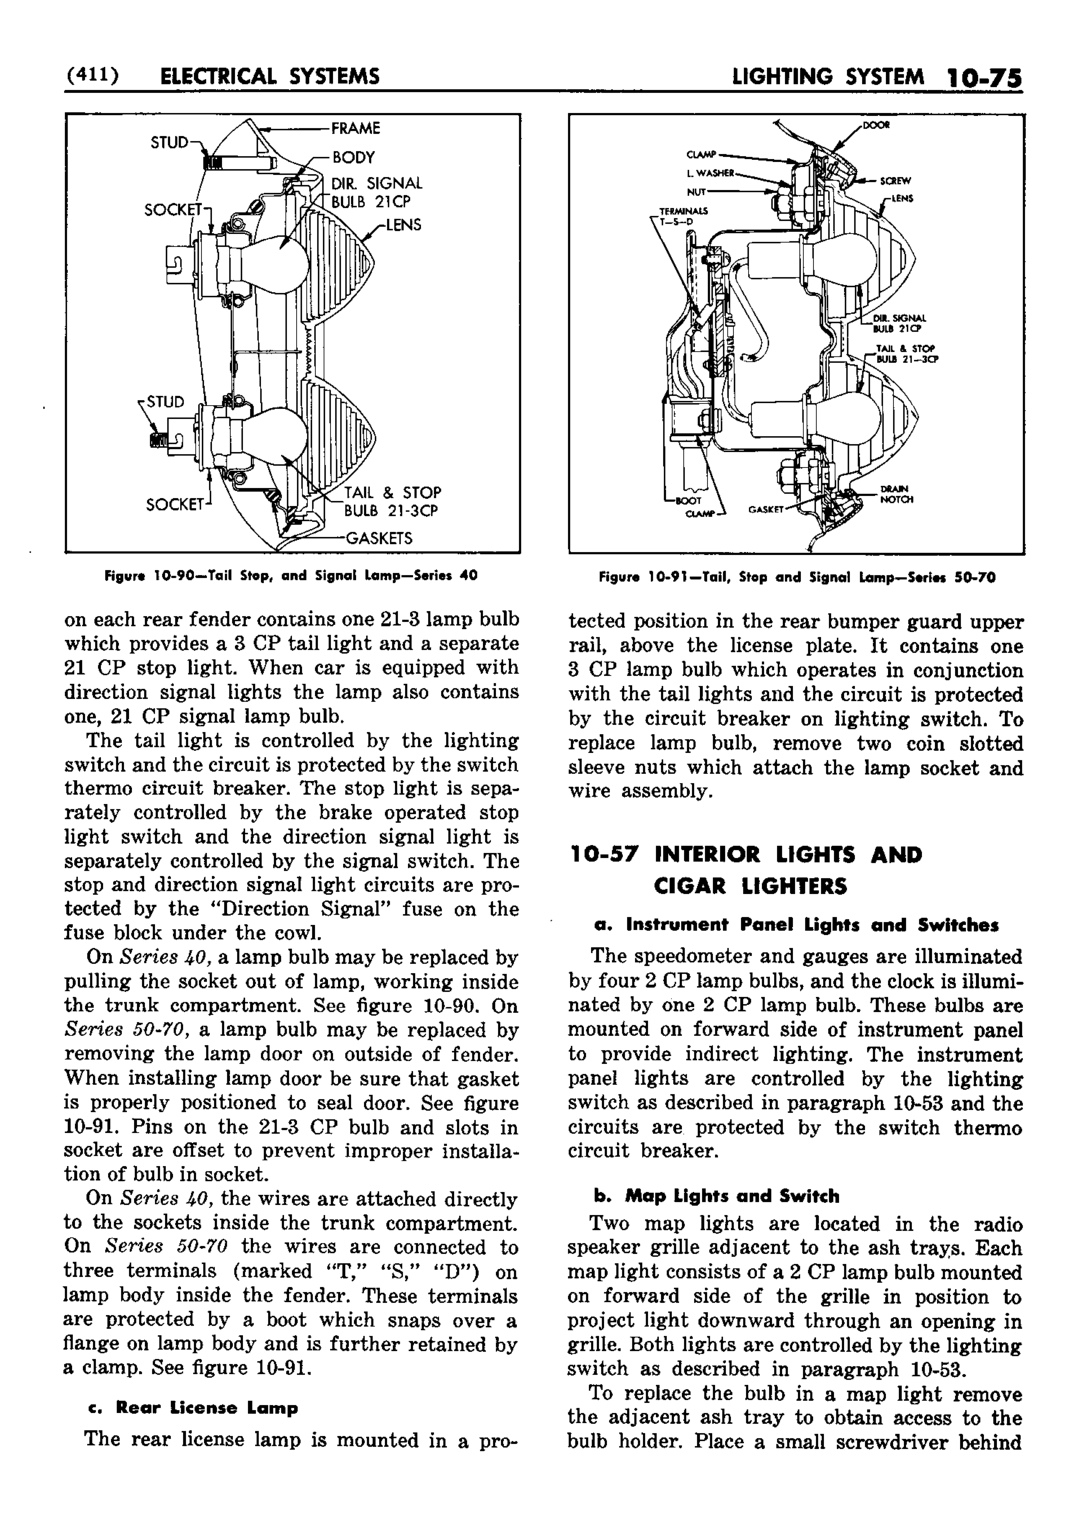 n_11 1952 Buick Shop Manual - Electrical Systems-075-075.jpg